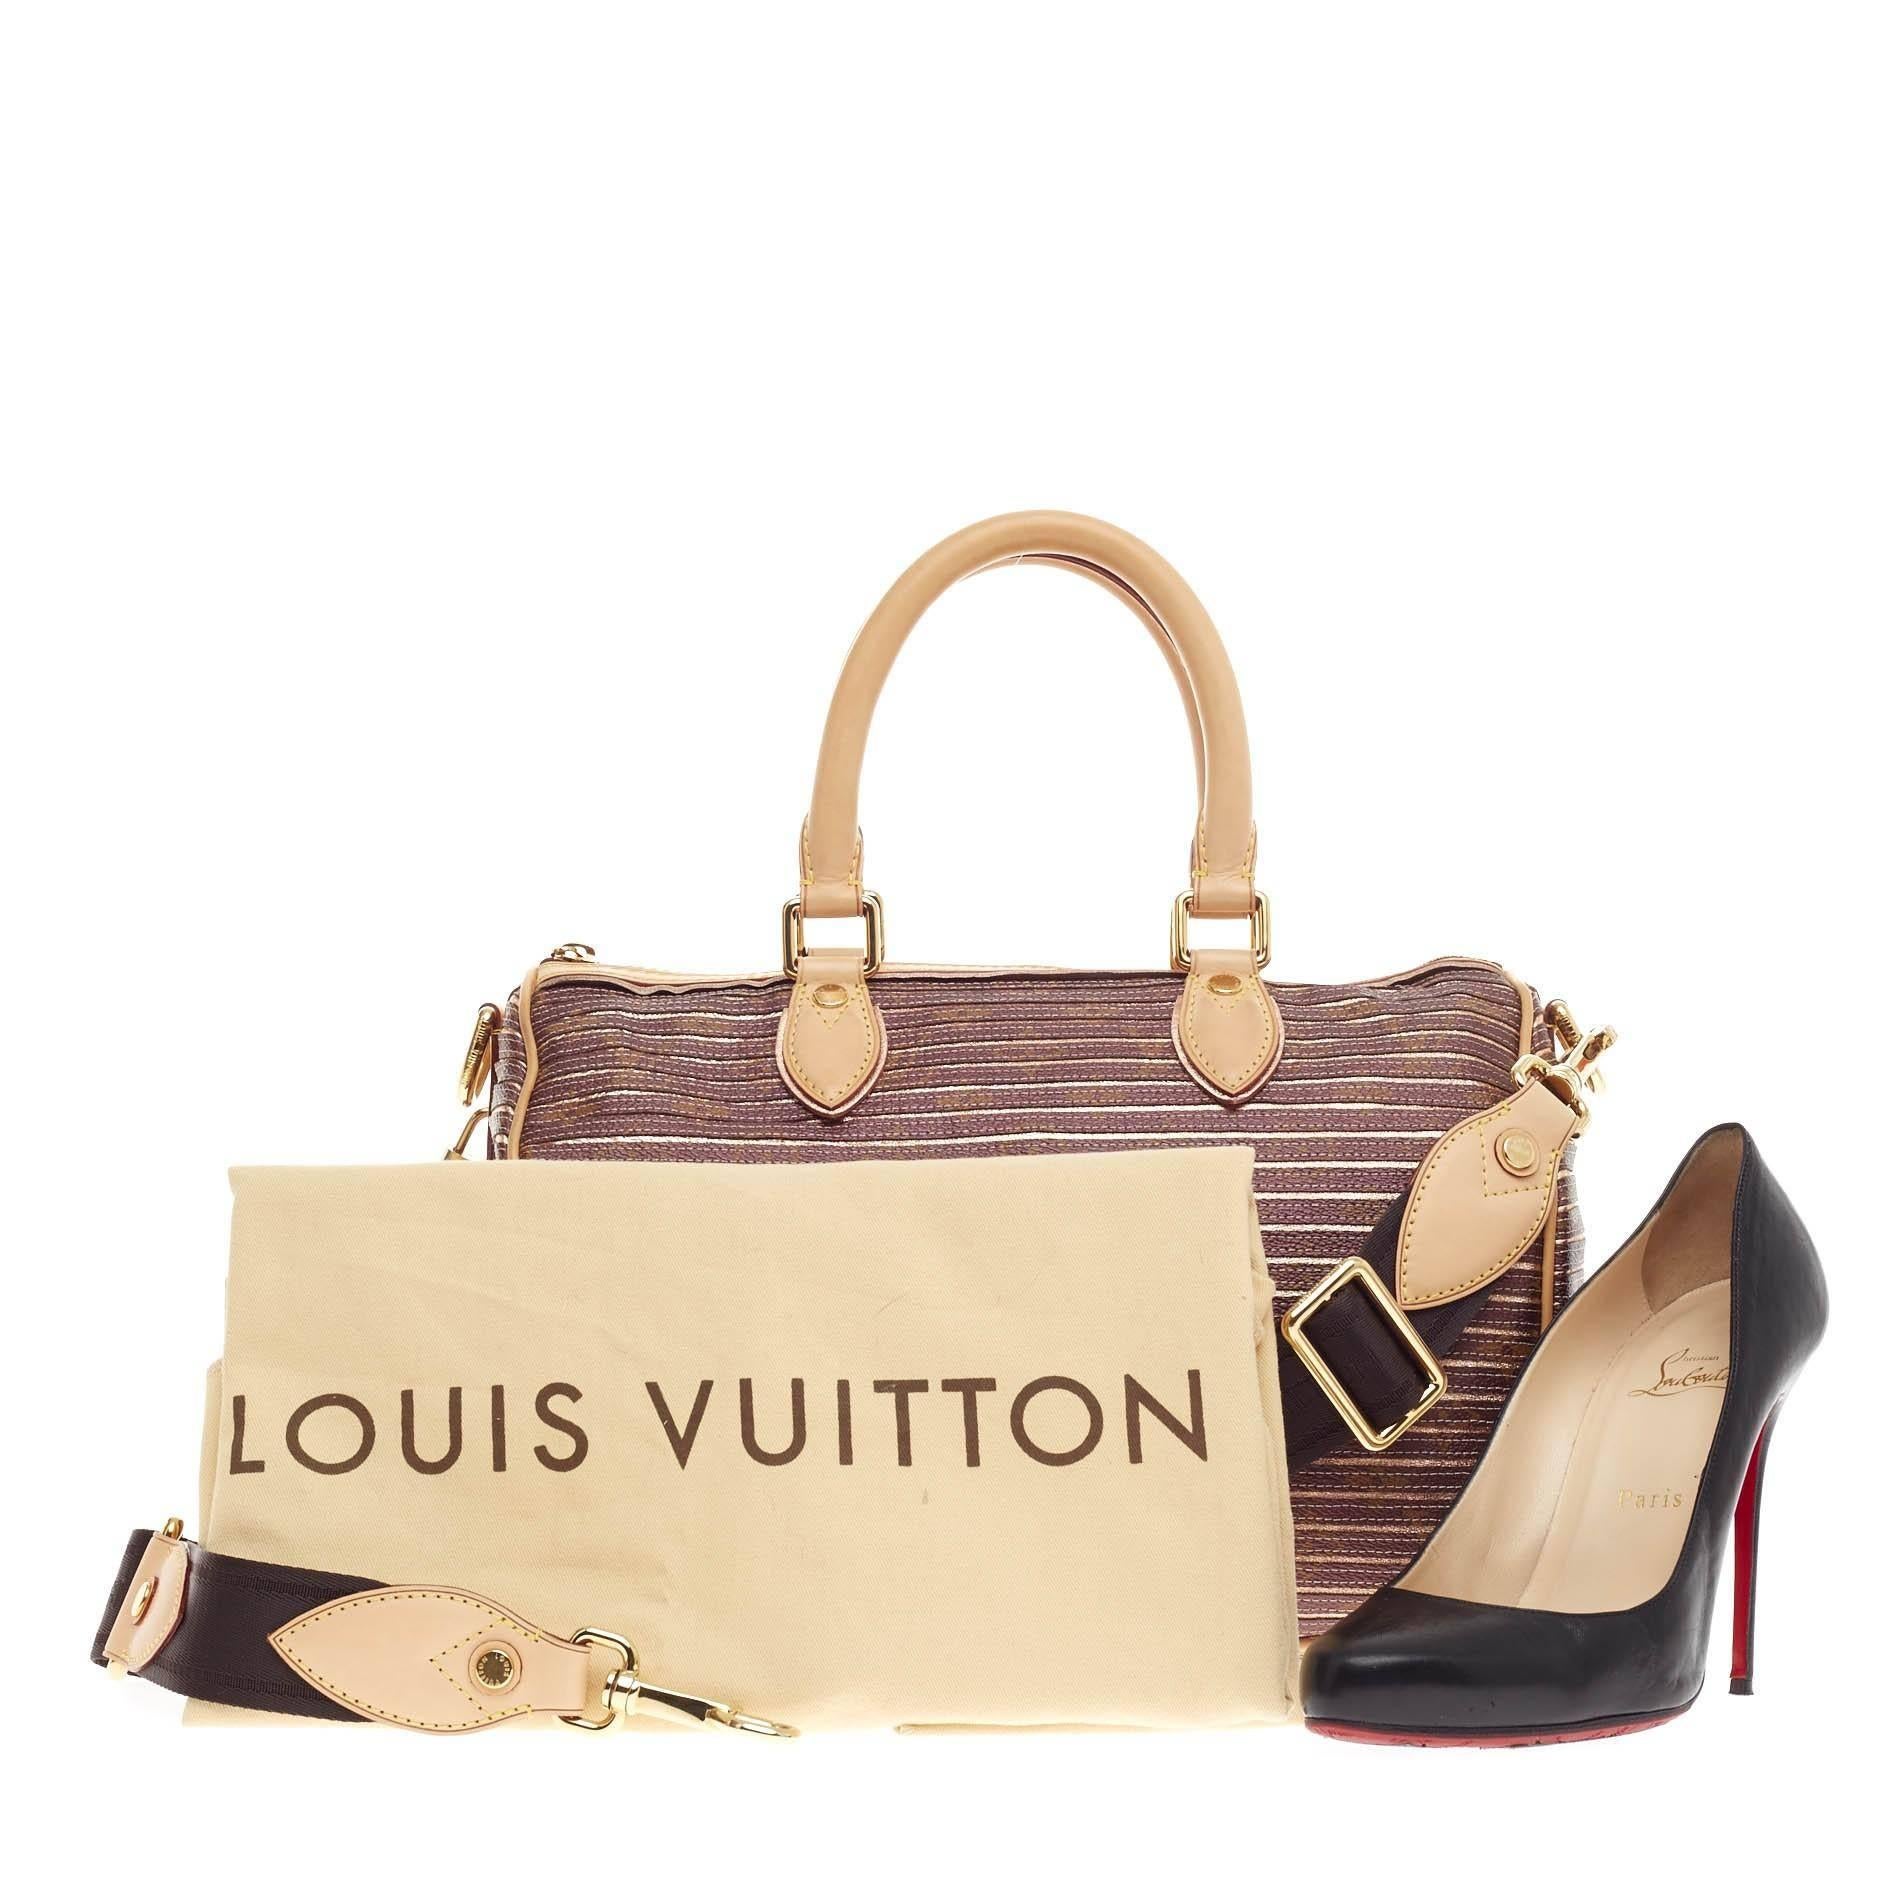 This authentic Louis Vuitton Speedy Bandouliere Limited Edition Monogram Eden 30 inspired by the iconic Speedy is reinvented in the brand's Spring/Summer 2010 collection. Crafted in classic monogram canvas with metallic peche leather stripes, this